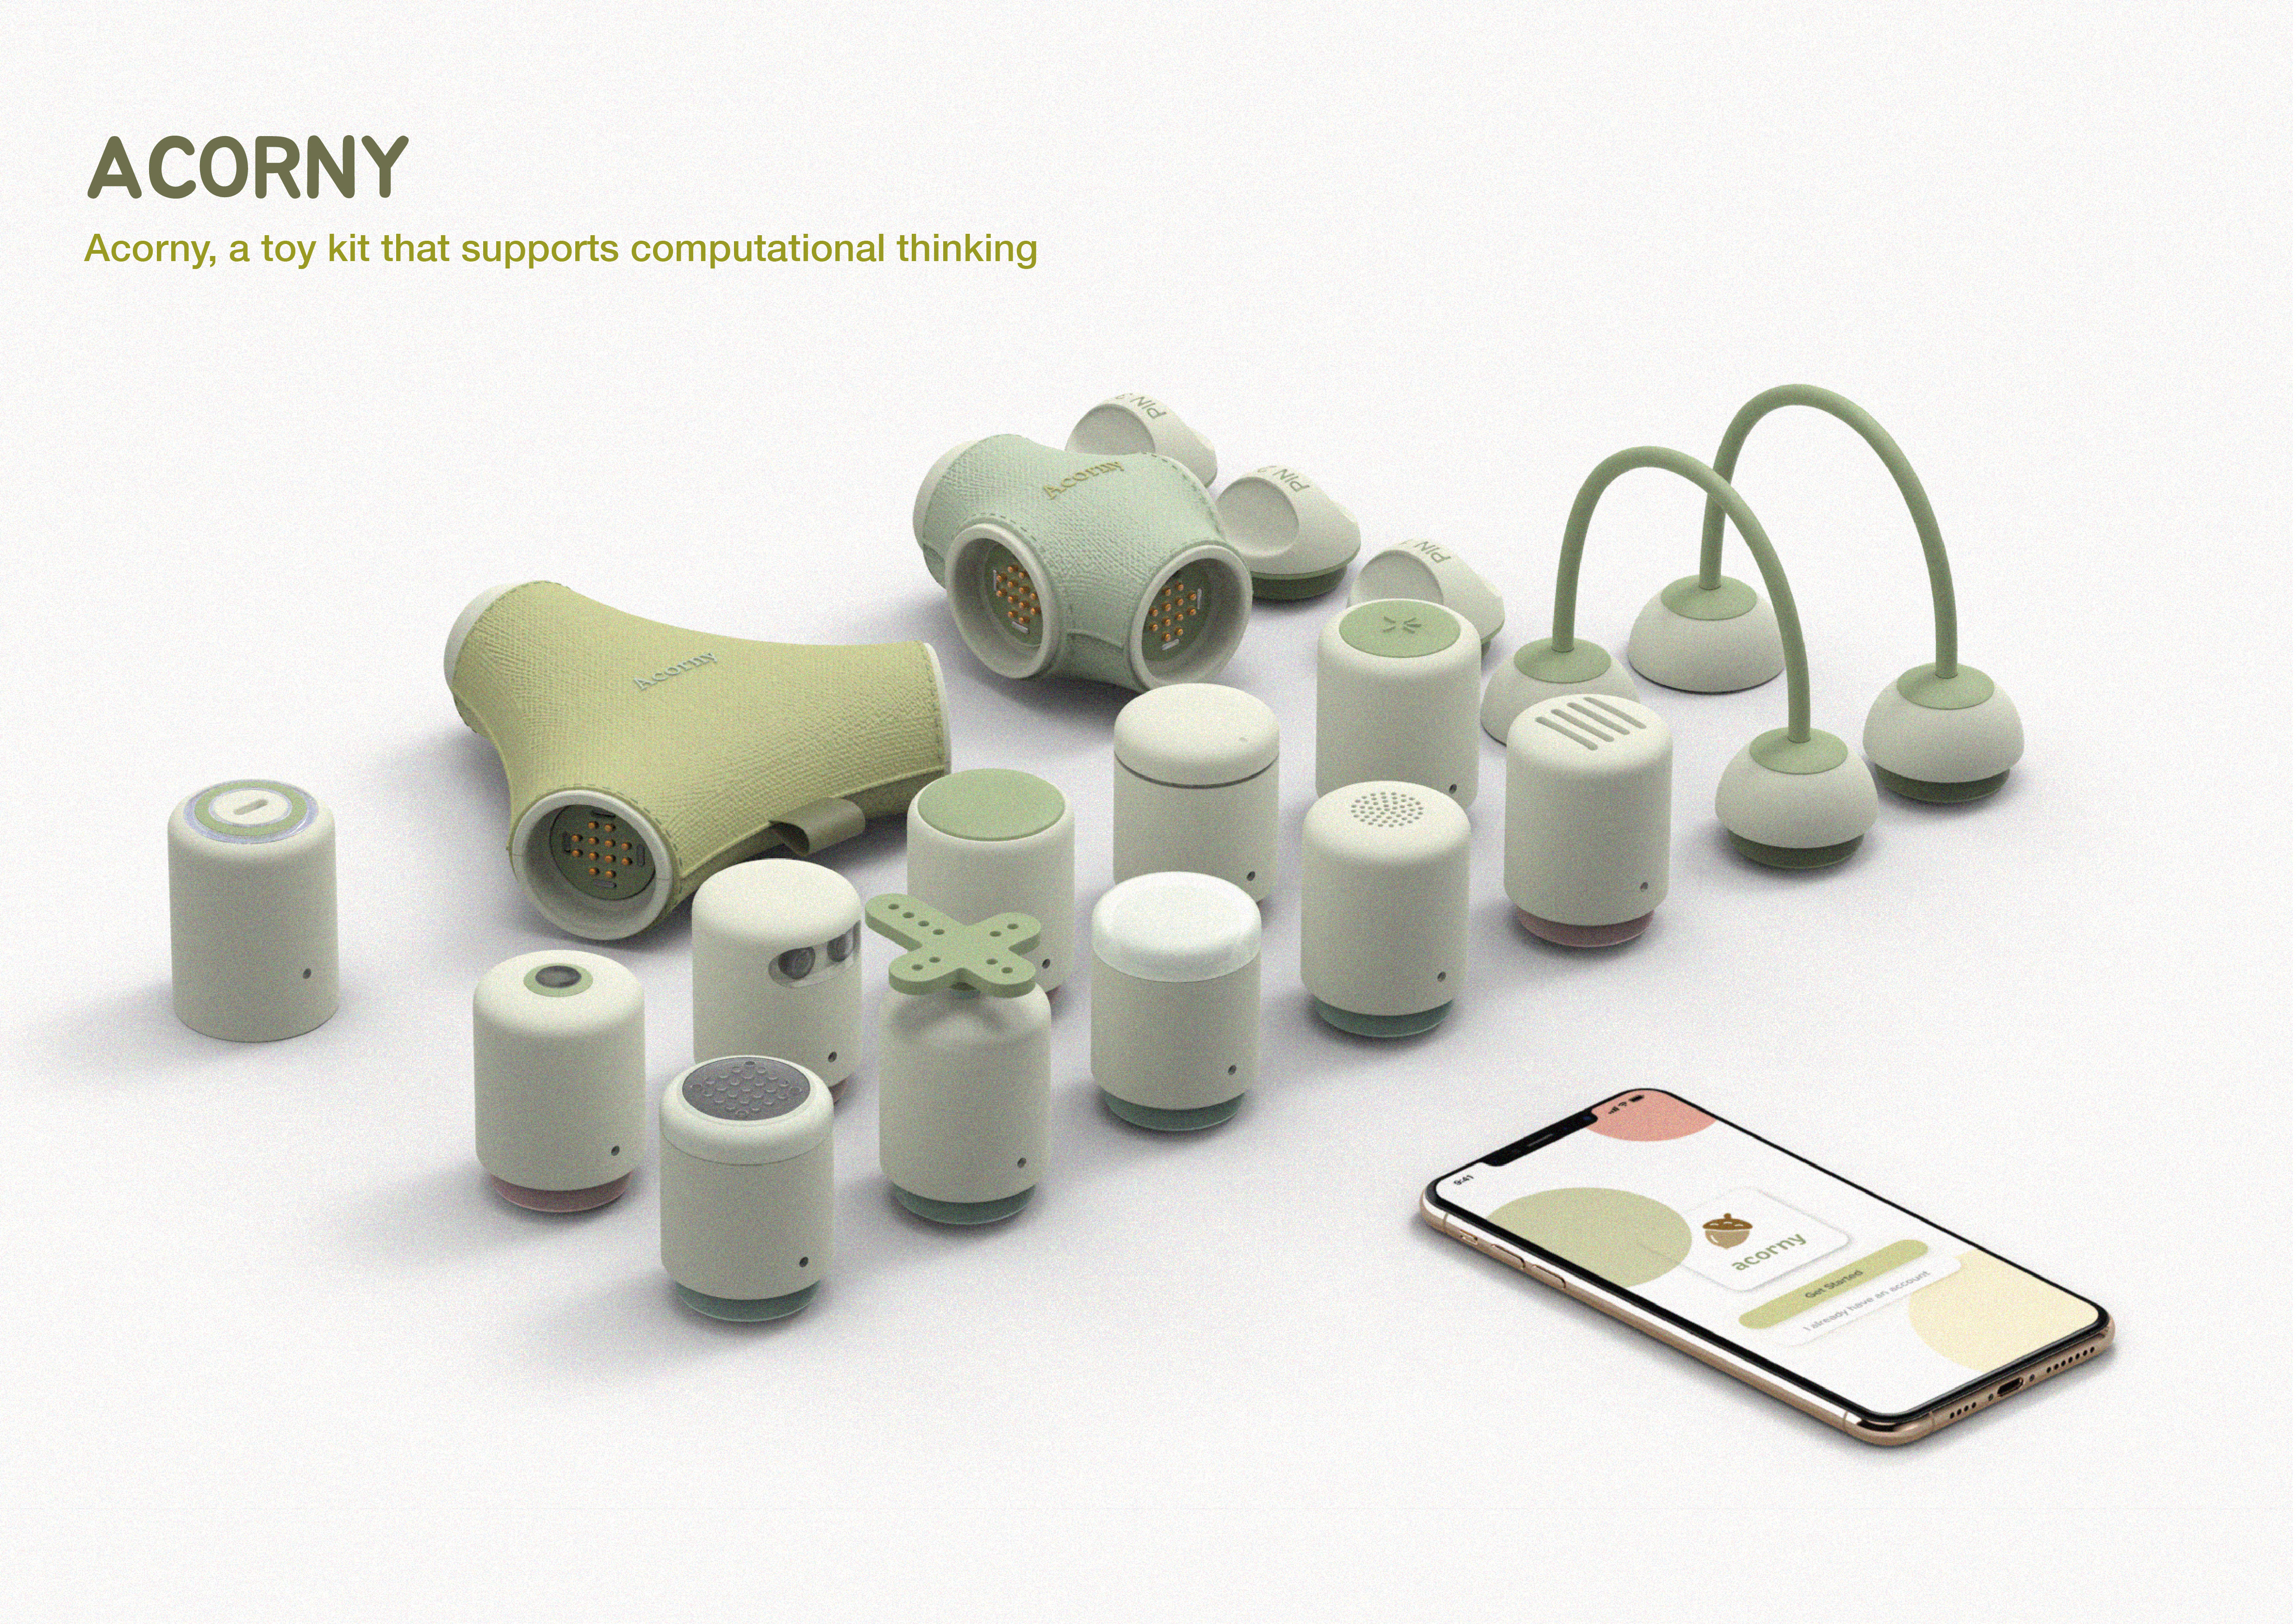 Acorny, a toy kit that supports computational thinking